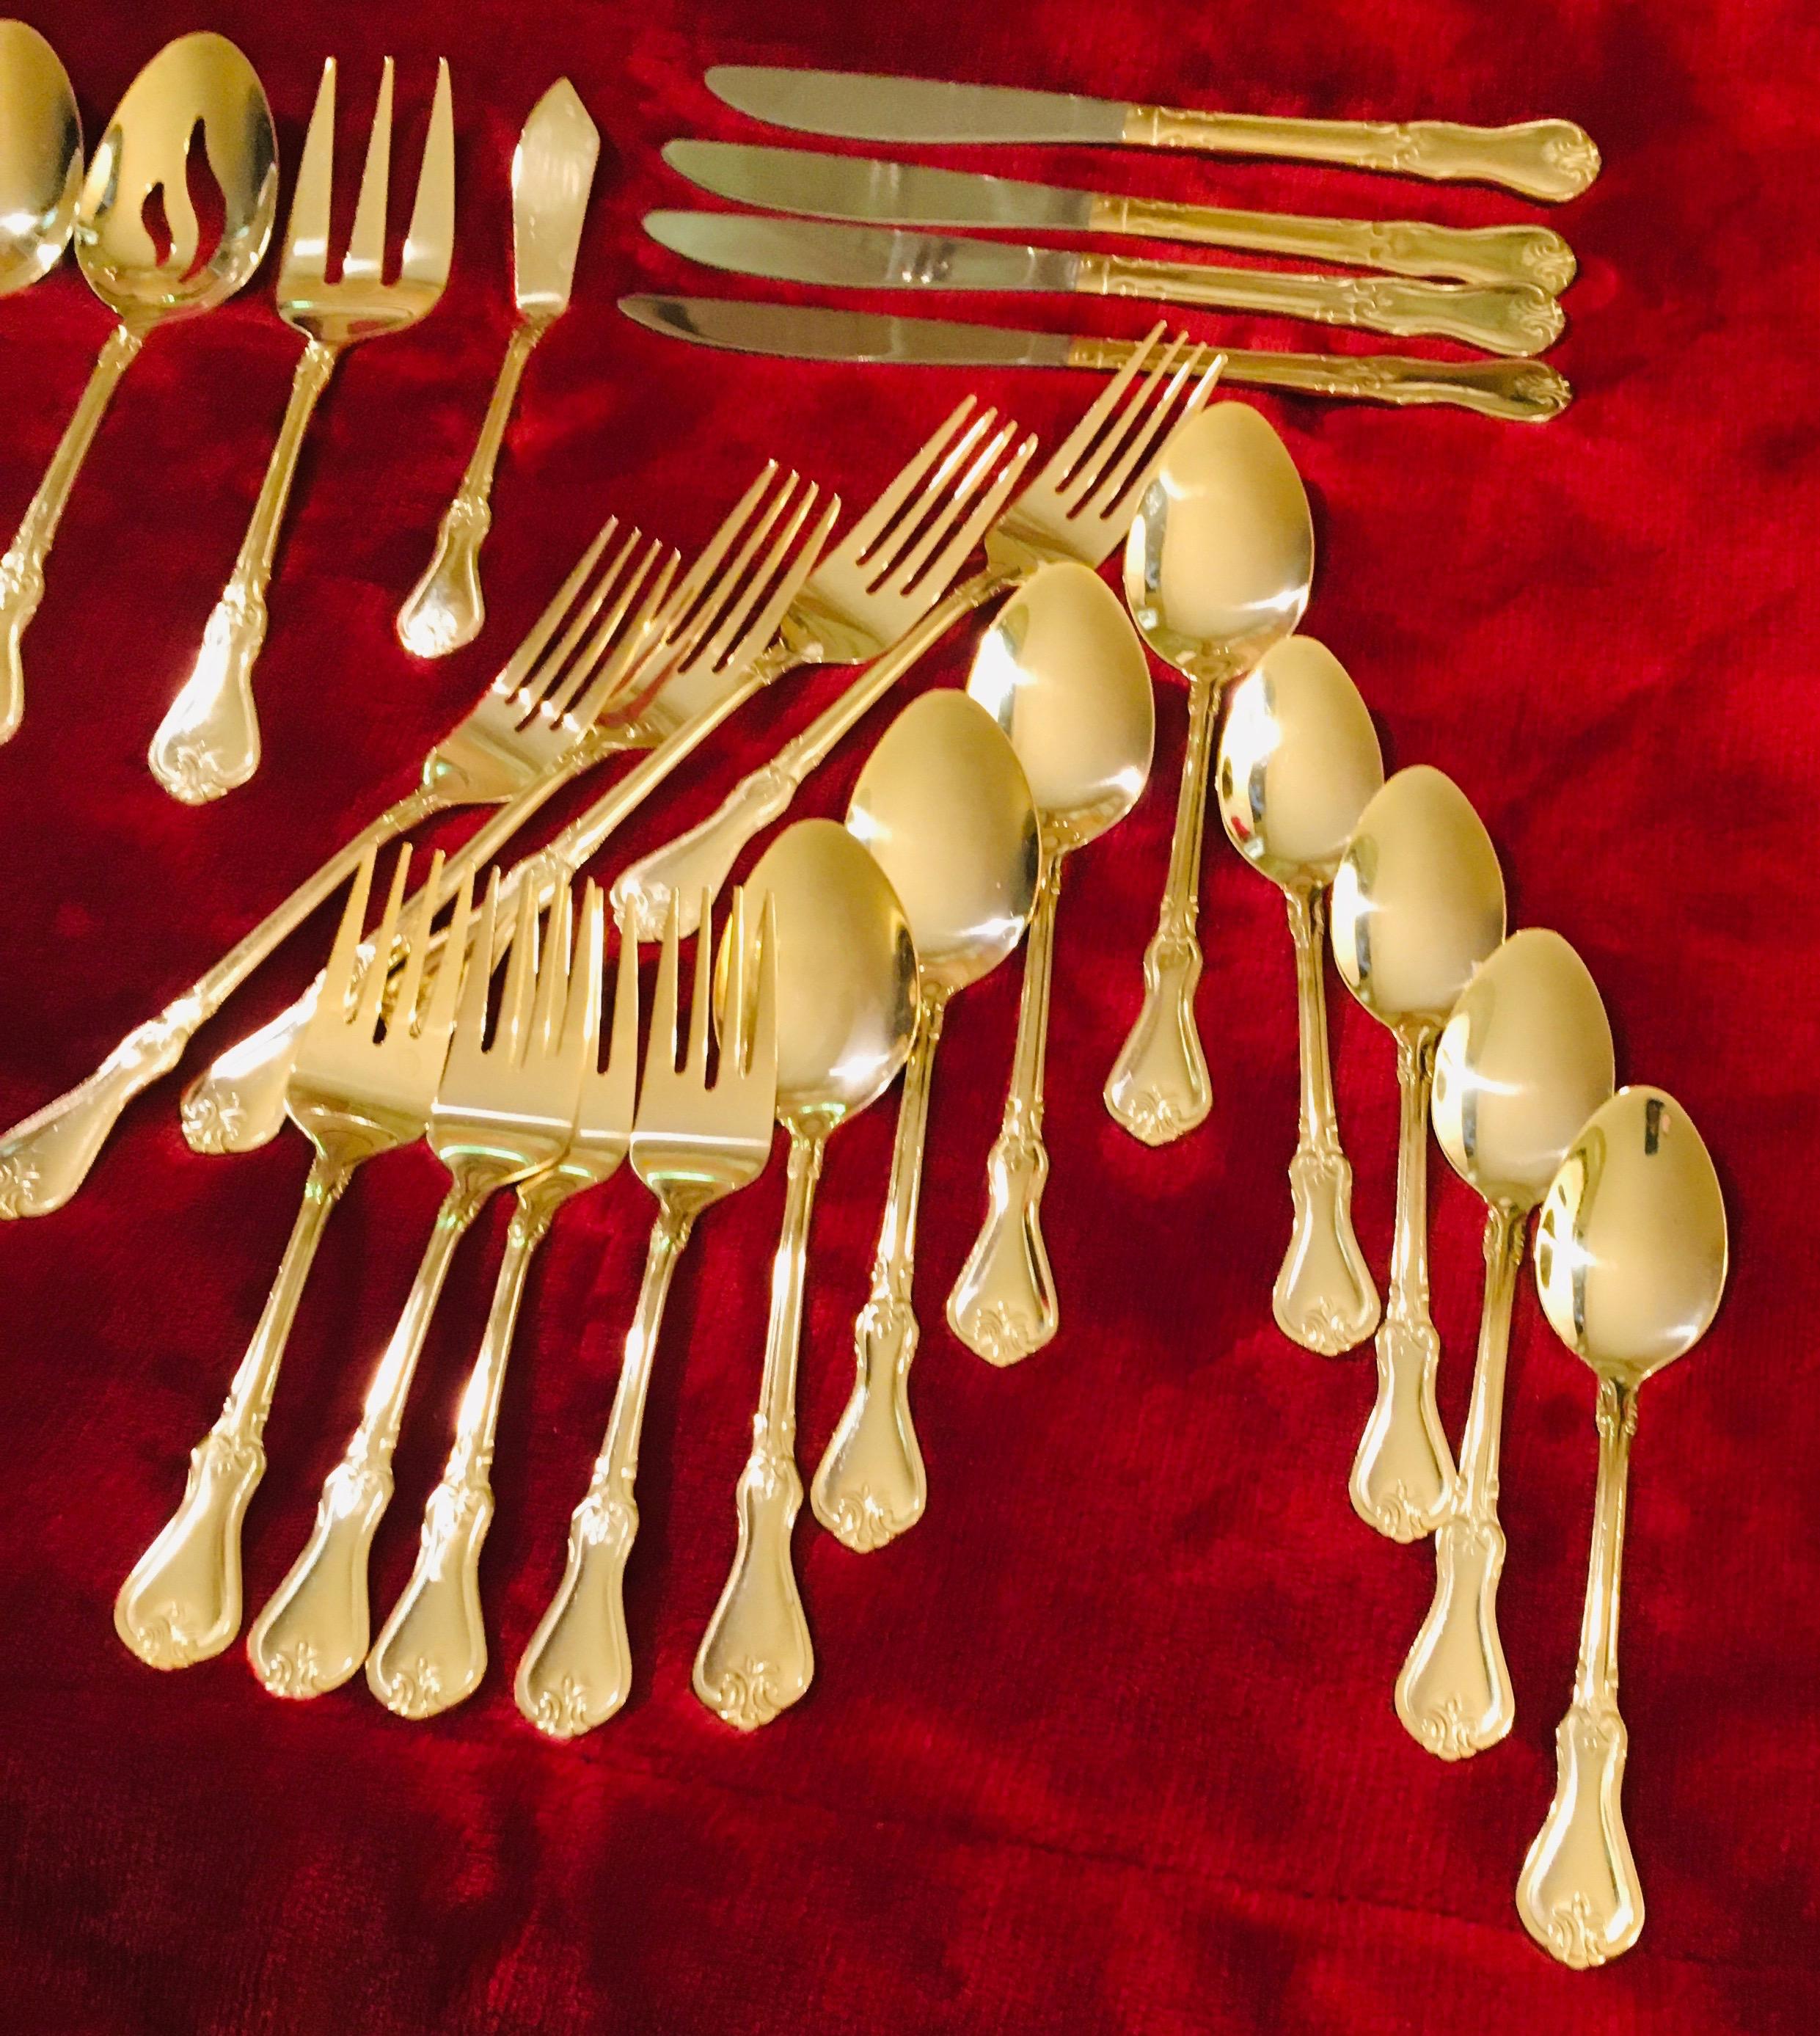 Prescott Forge Alco 46 Piece Flatware Set 18/0 Stainless Gold Plated Wooden Hostess Tray.